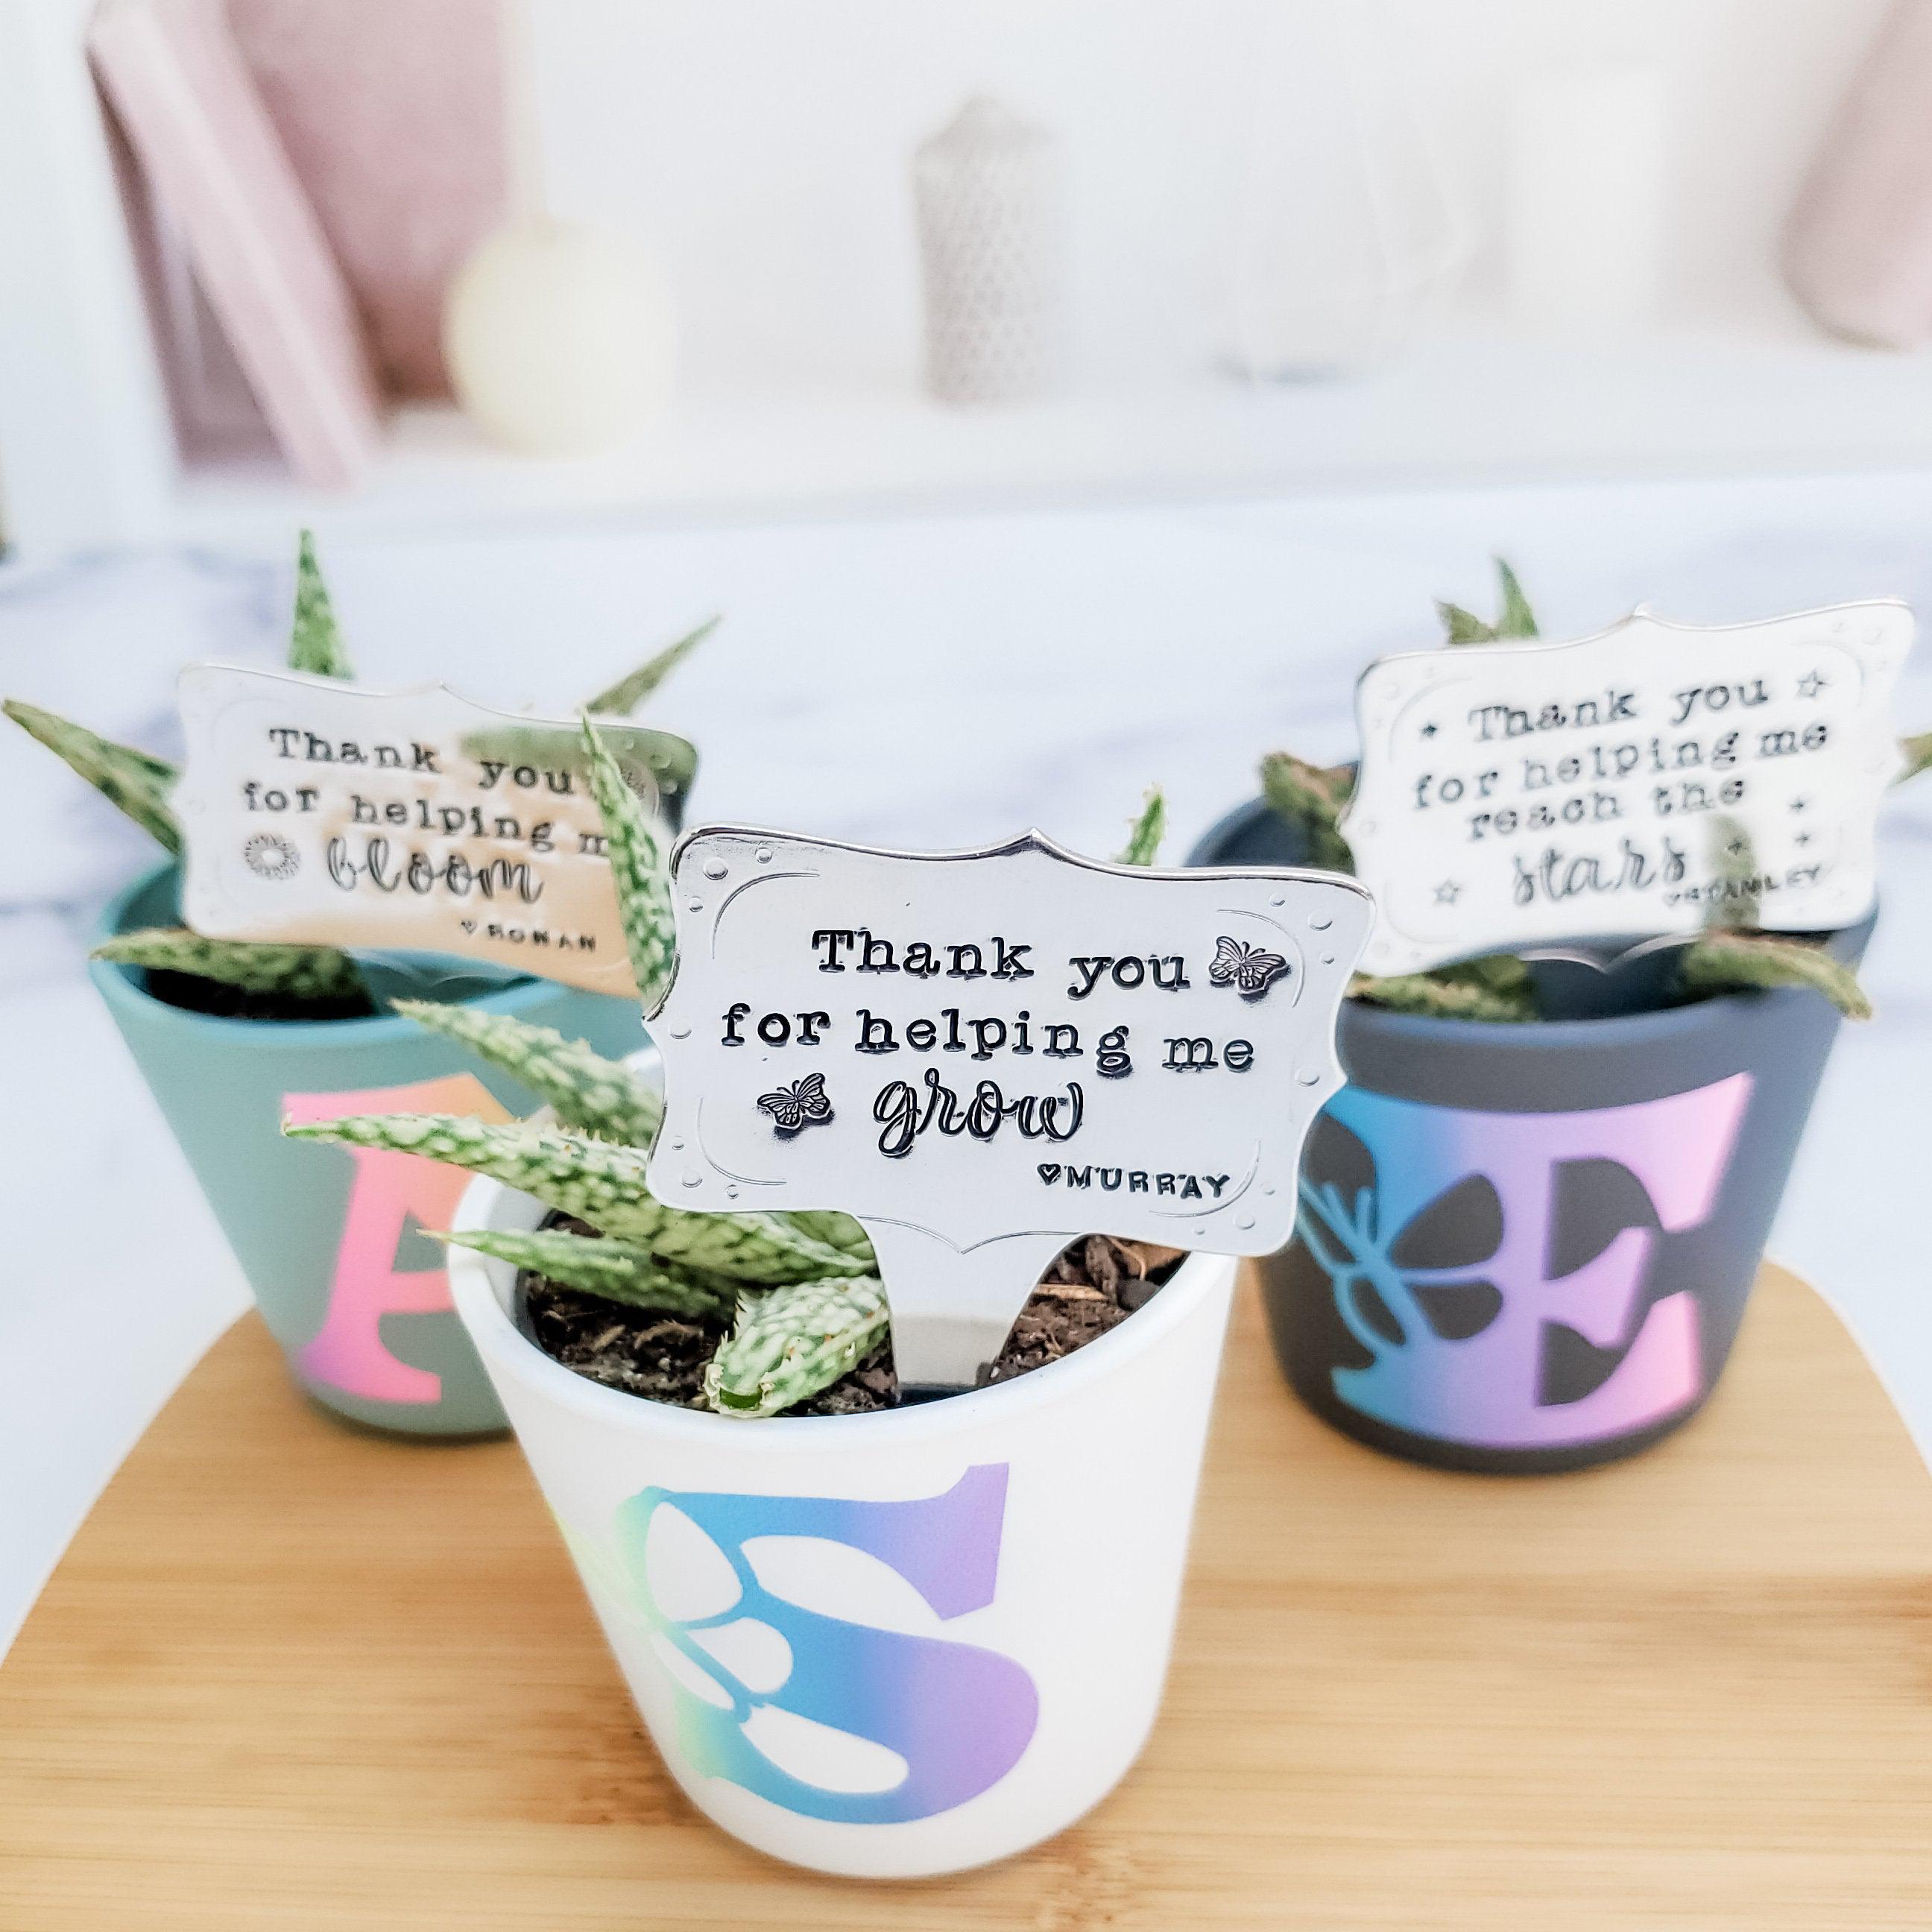 End of the Year Teacher Gift - Thank You for Helping Me Grow Plant Marker for Teacher Appreciation - Succulent Sticks for Teacher Gift